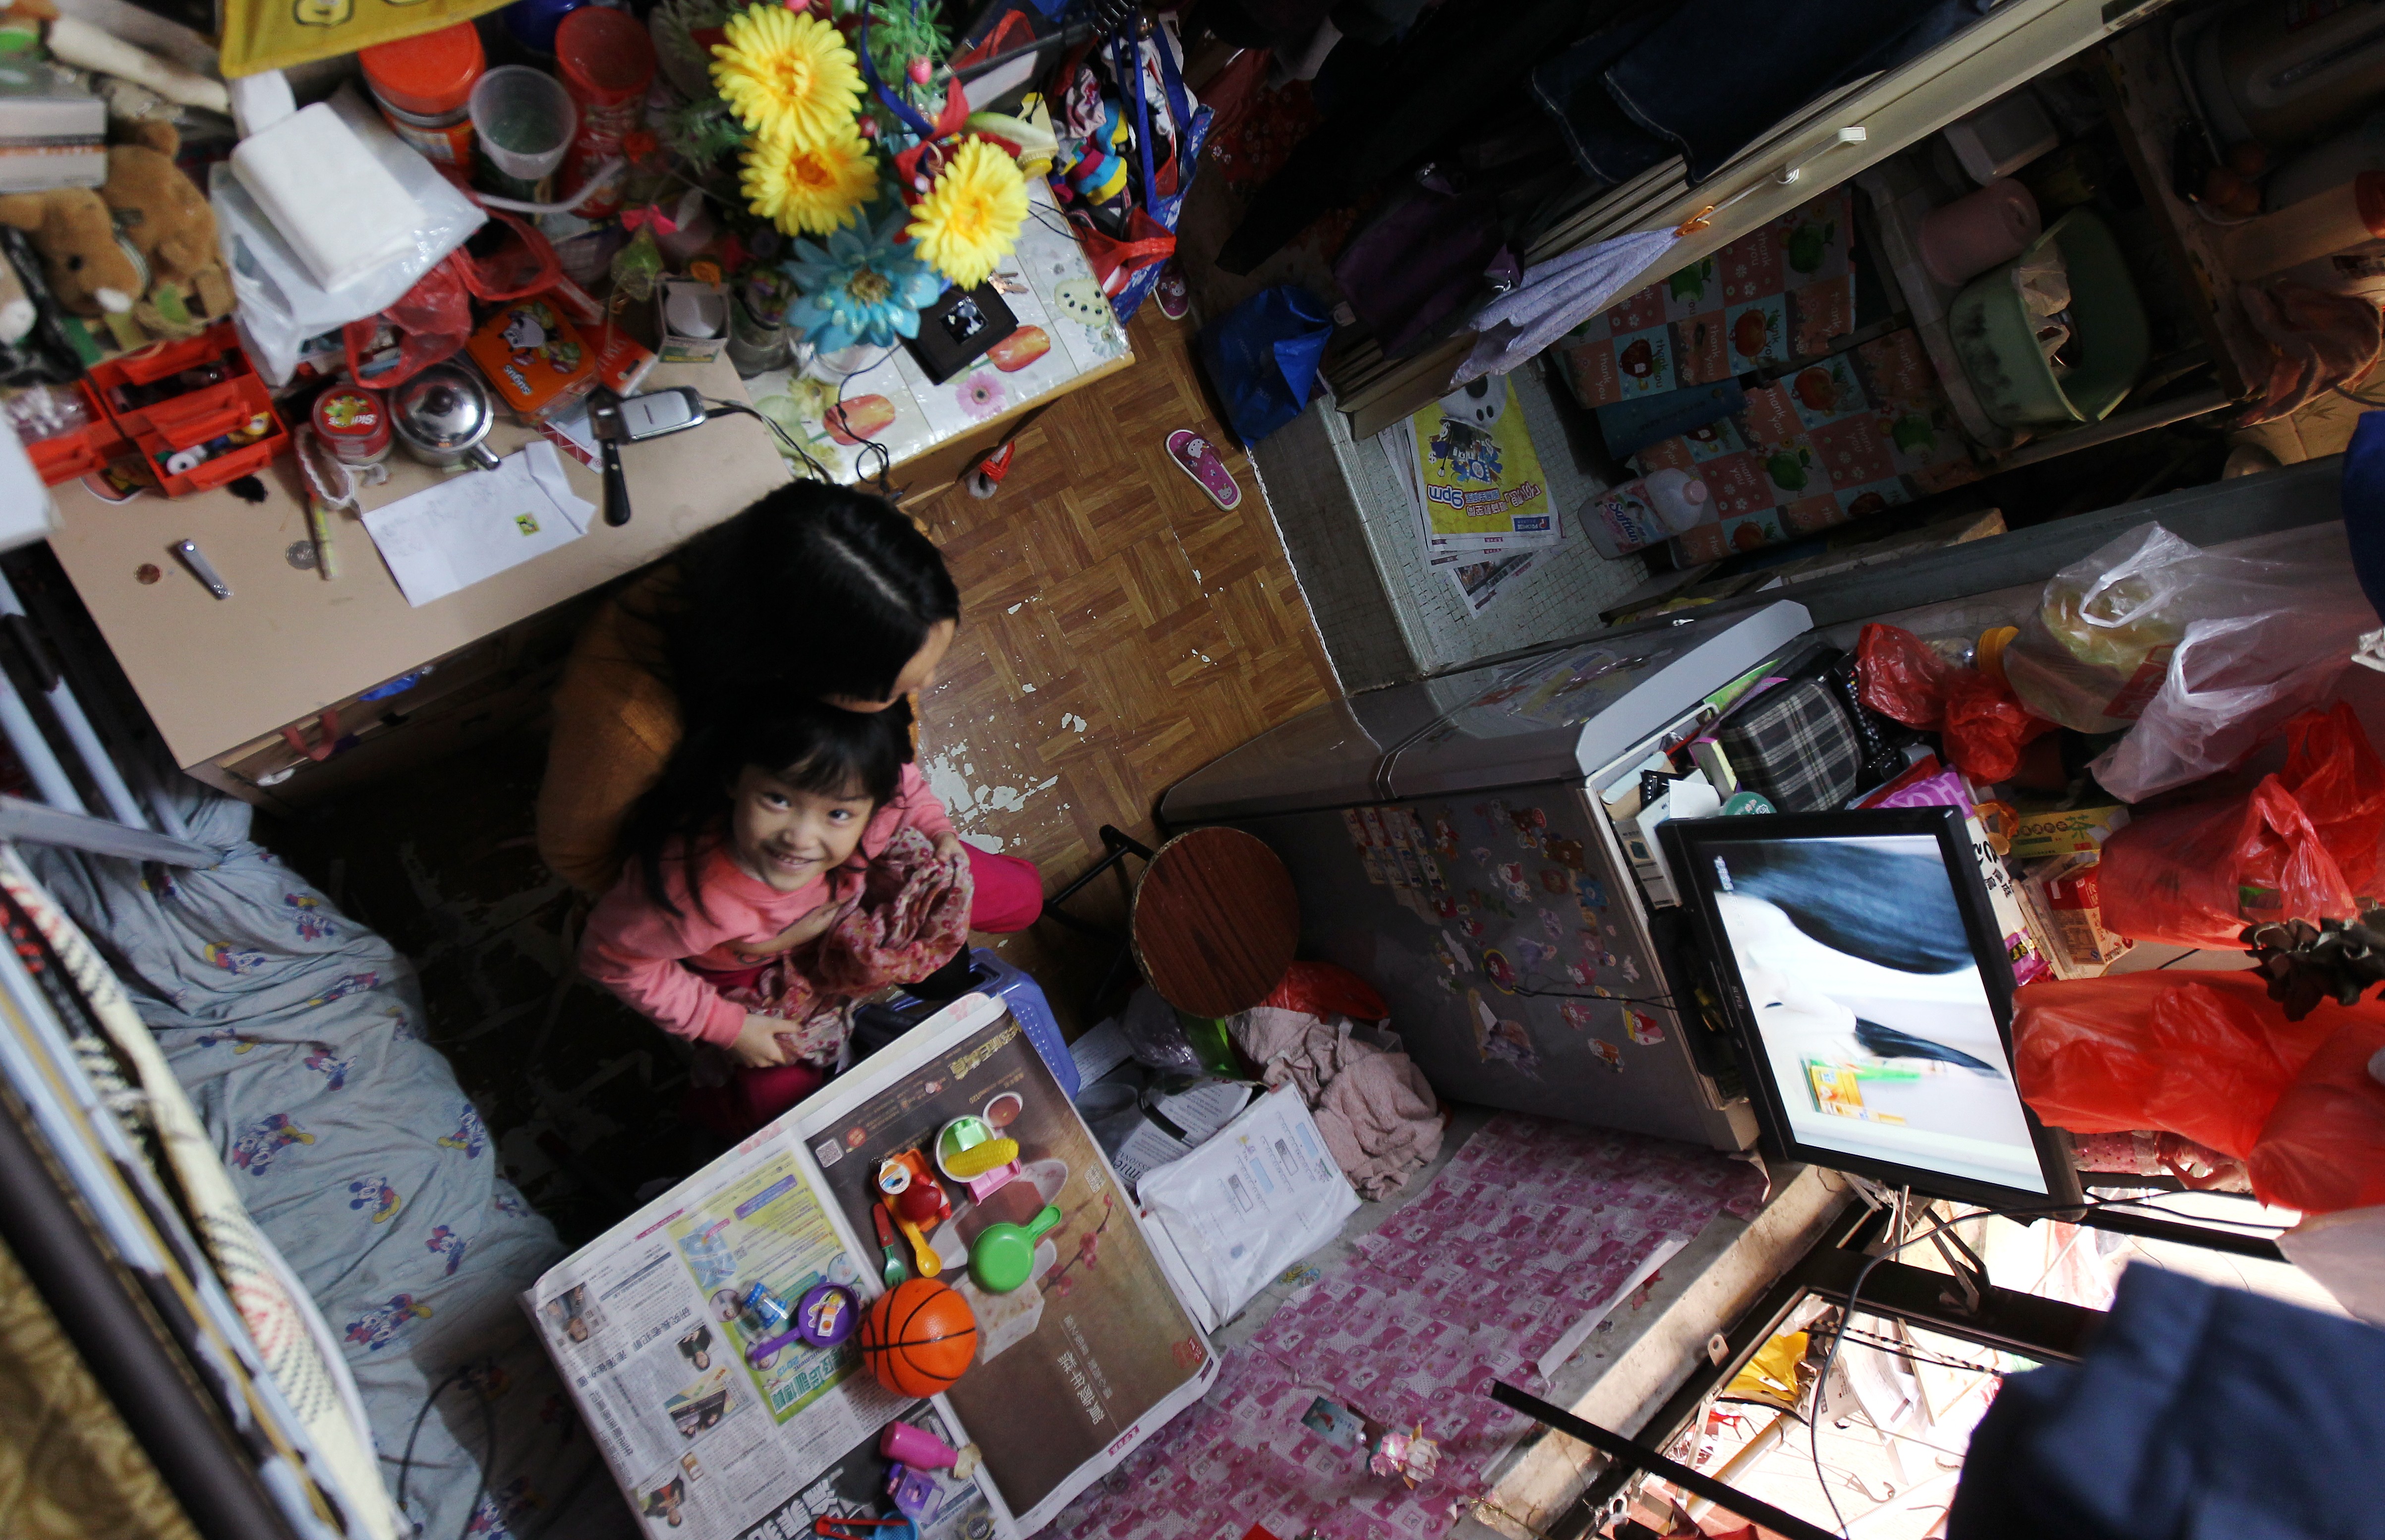 In a child’s eyes, life in a subdivided flat is not necessarily miserable. Photo: K.Y. Cheng